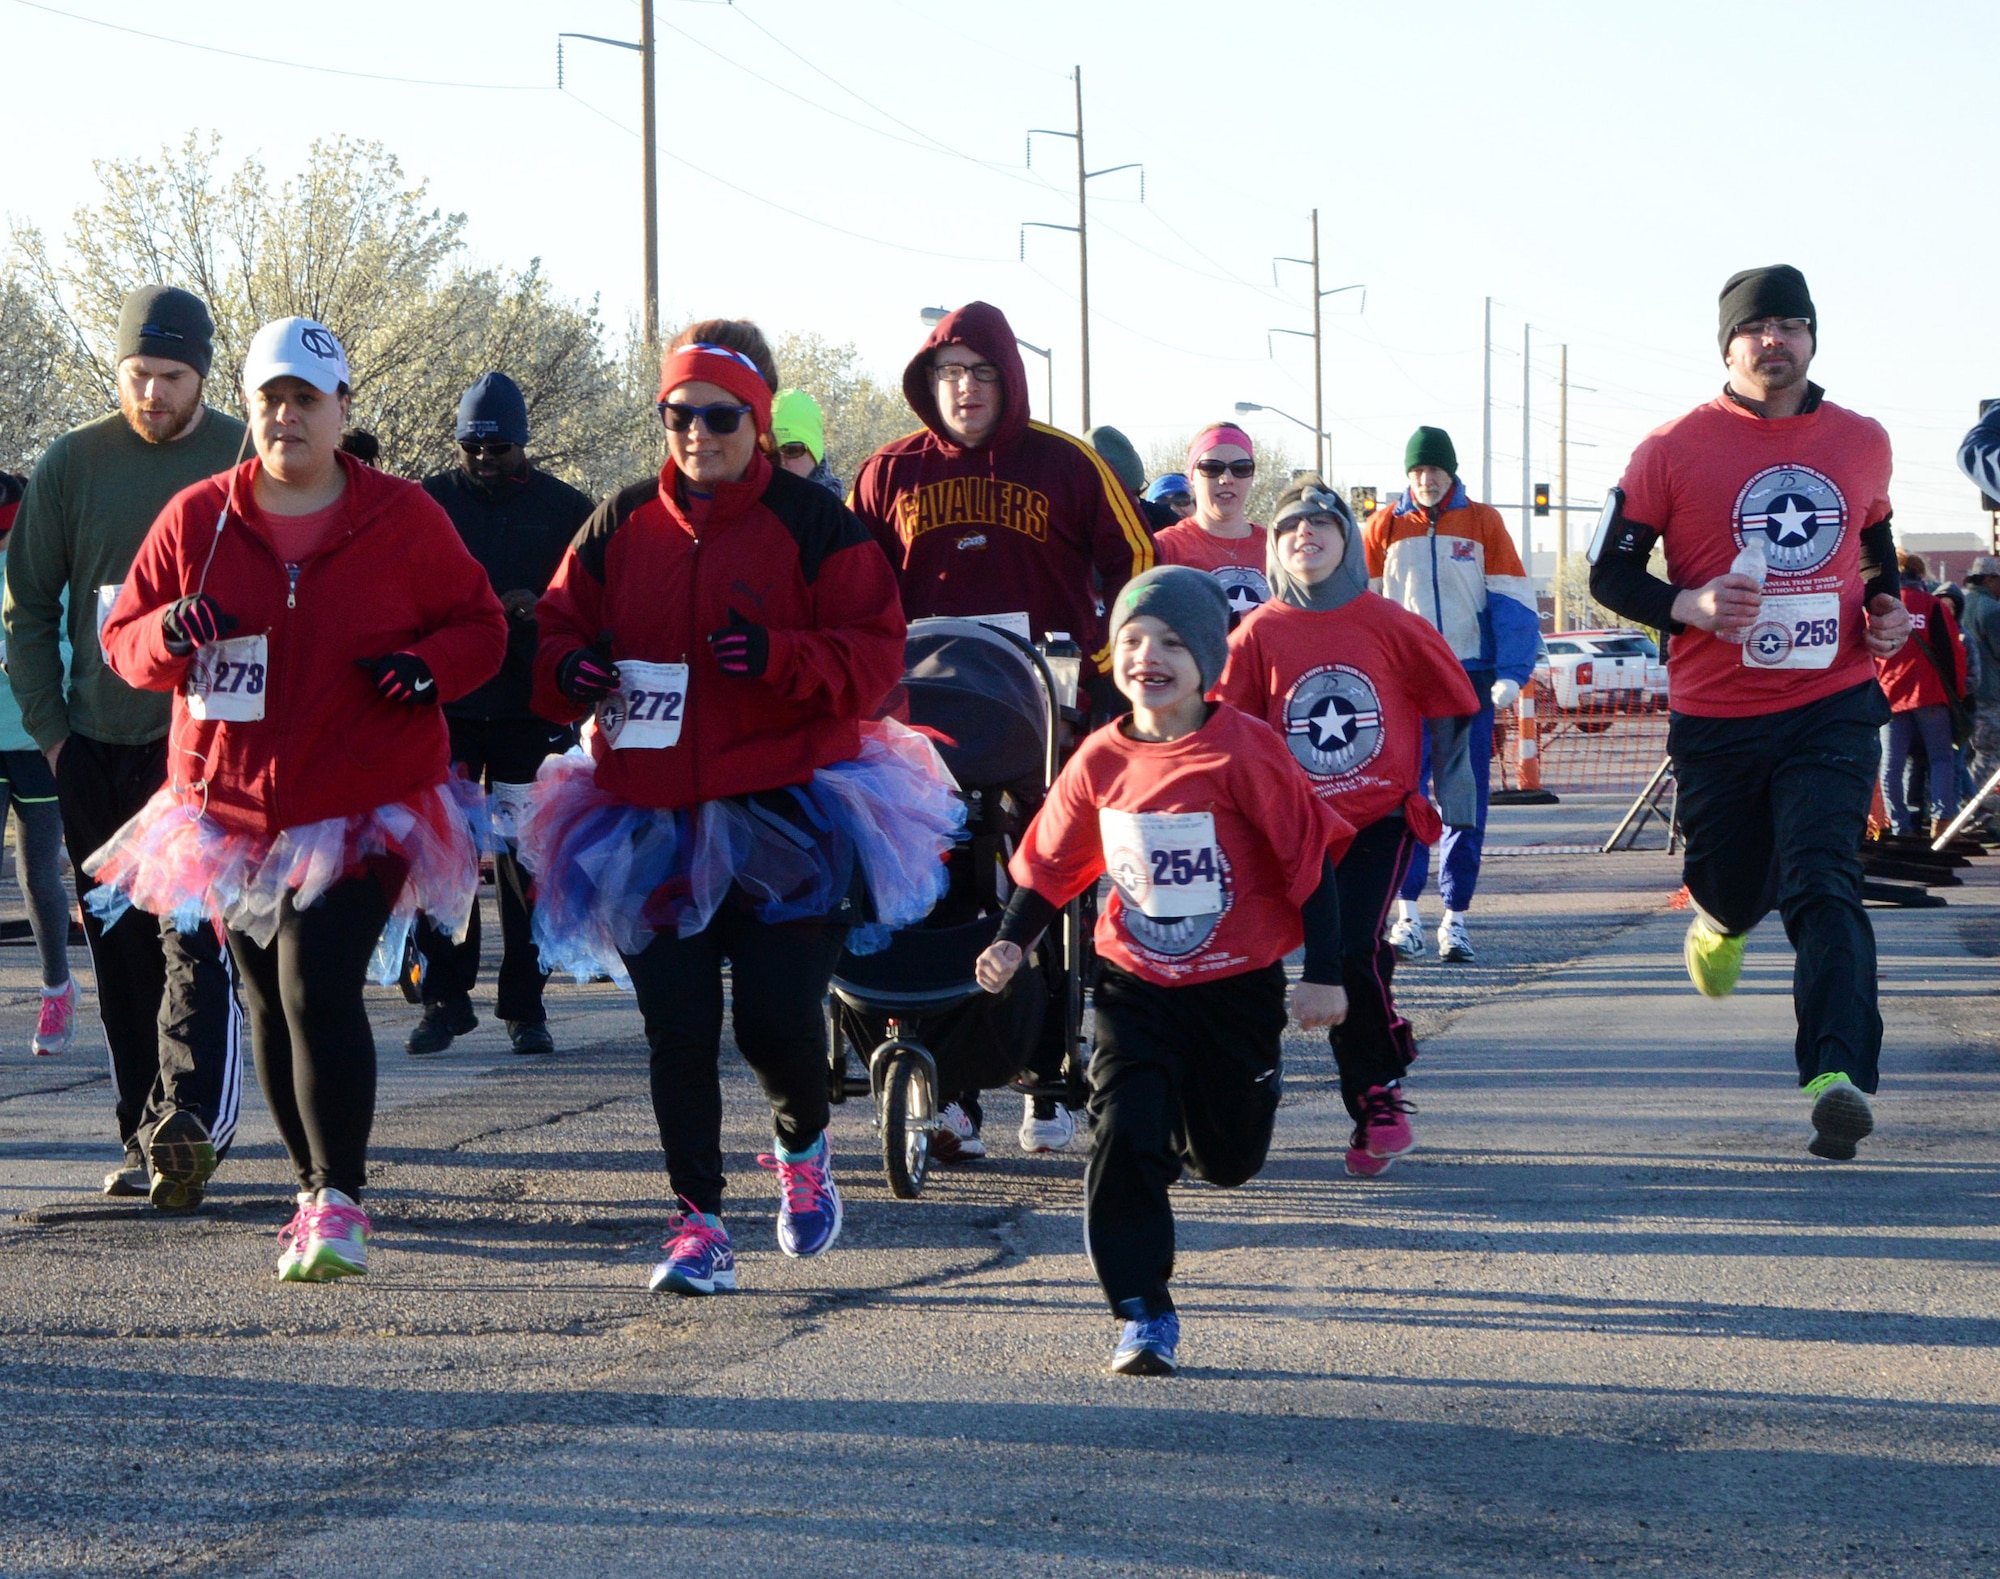 People of all ages participated in Tinker’s 75th Anniversary Half Marathon and 5K Feb. 25. The Calvert family, all wearing their red event T-shirts, ran the 5K together. (Air Force photo by Kelly White)